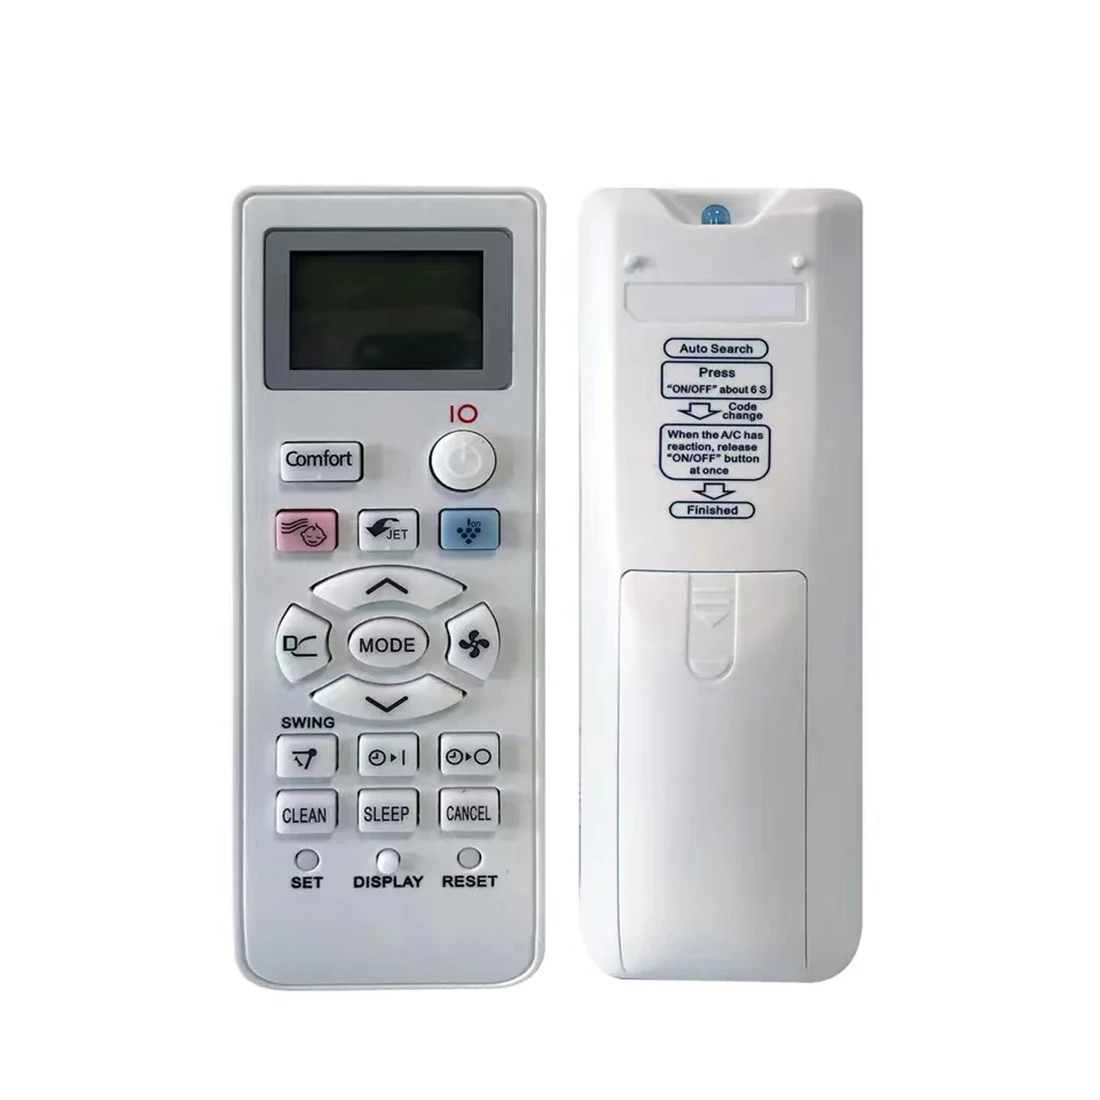 

Universal Air Conditioner Remote Control for SHARP CRMC-A998JBEZ CRMC-A907JBEZ CRMC-A036JBEZ CRMC-A901JBEZ CRMC-A937JBEZ